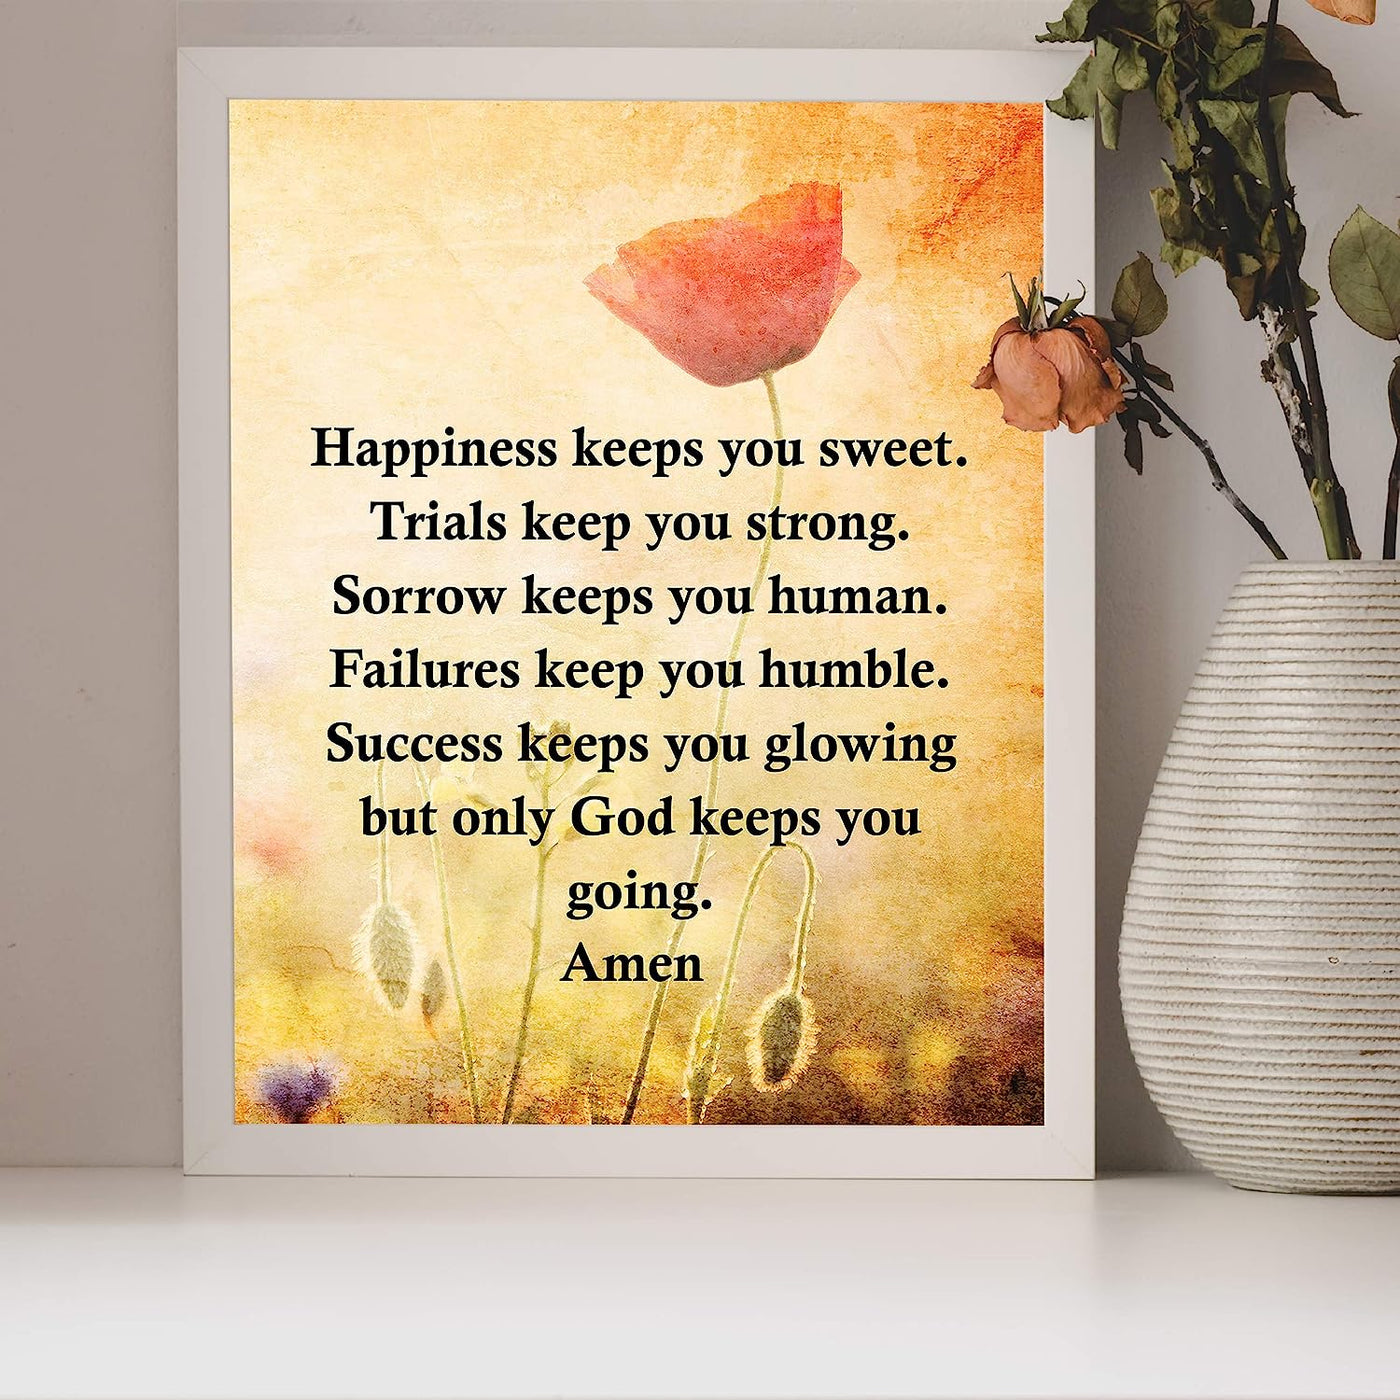 Happiness Keeps You Sweet-Only God Keeps You Going Inspirational Quotes Wall Art -8 x 10" Floral Christian Print-Ready to Frame. Home-Office-Sunday School-Church Decor. Great Gift of Faith!